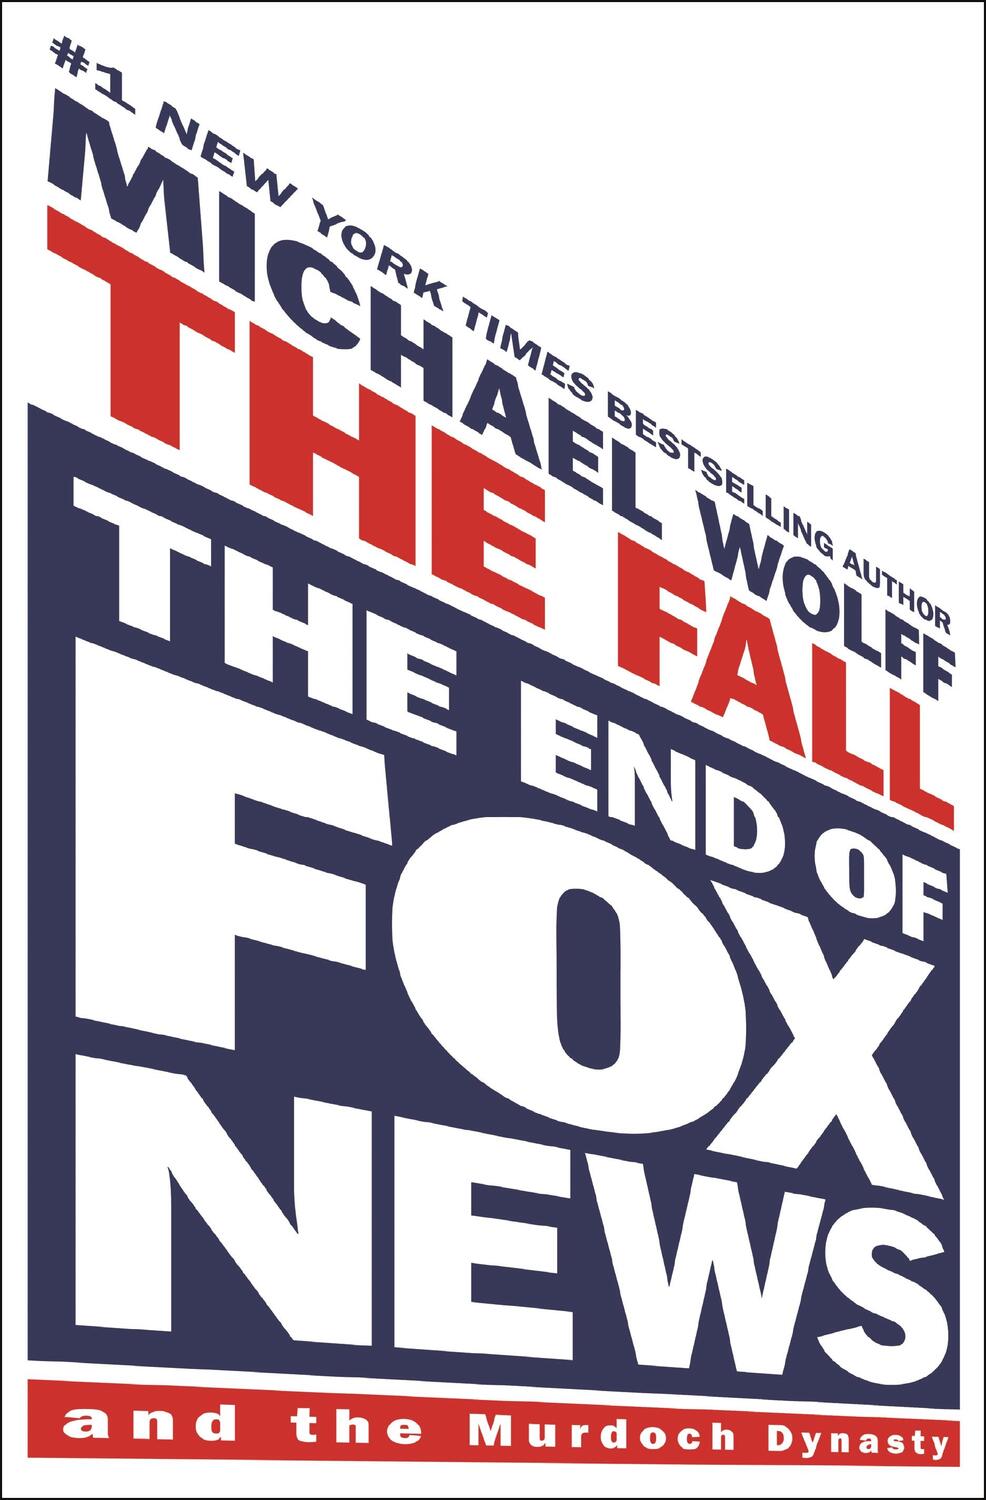 Autor: 9781250879271 | The Fall: The End of Fox News and the Murdoch Dynasty | Michael Wolff